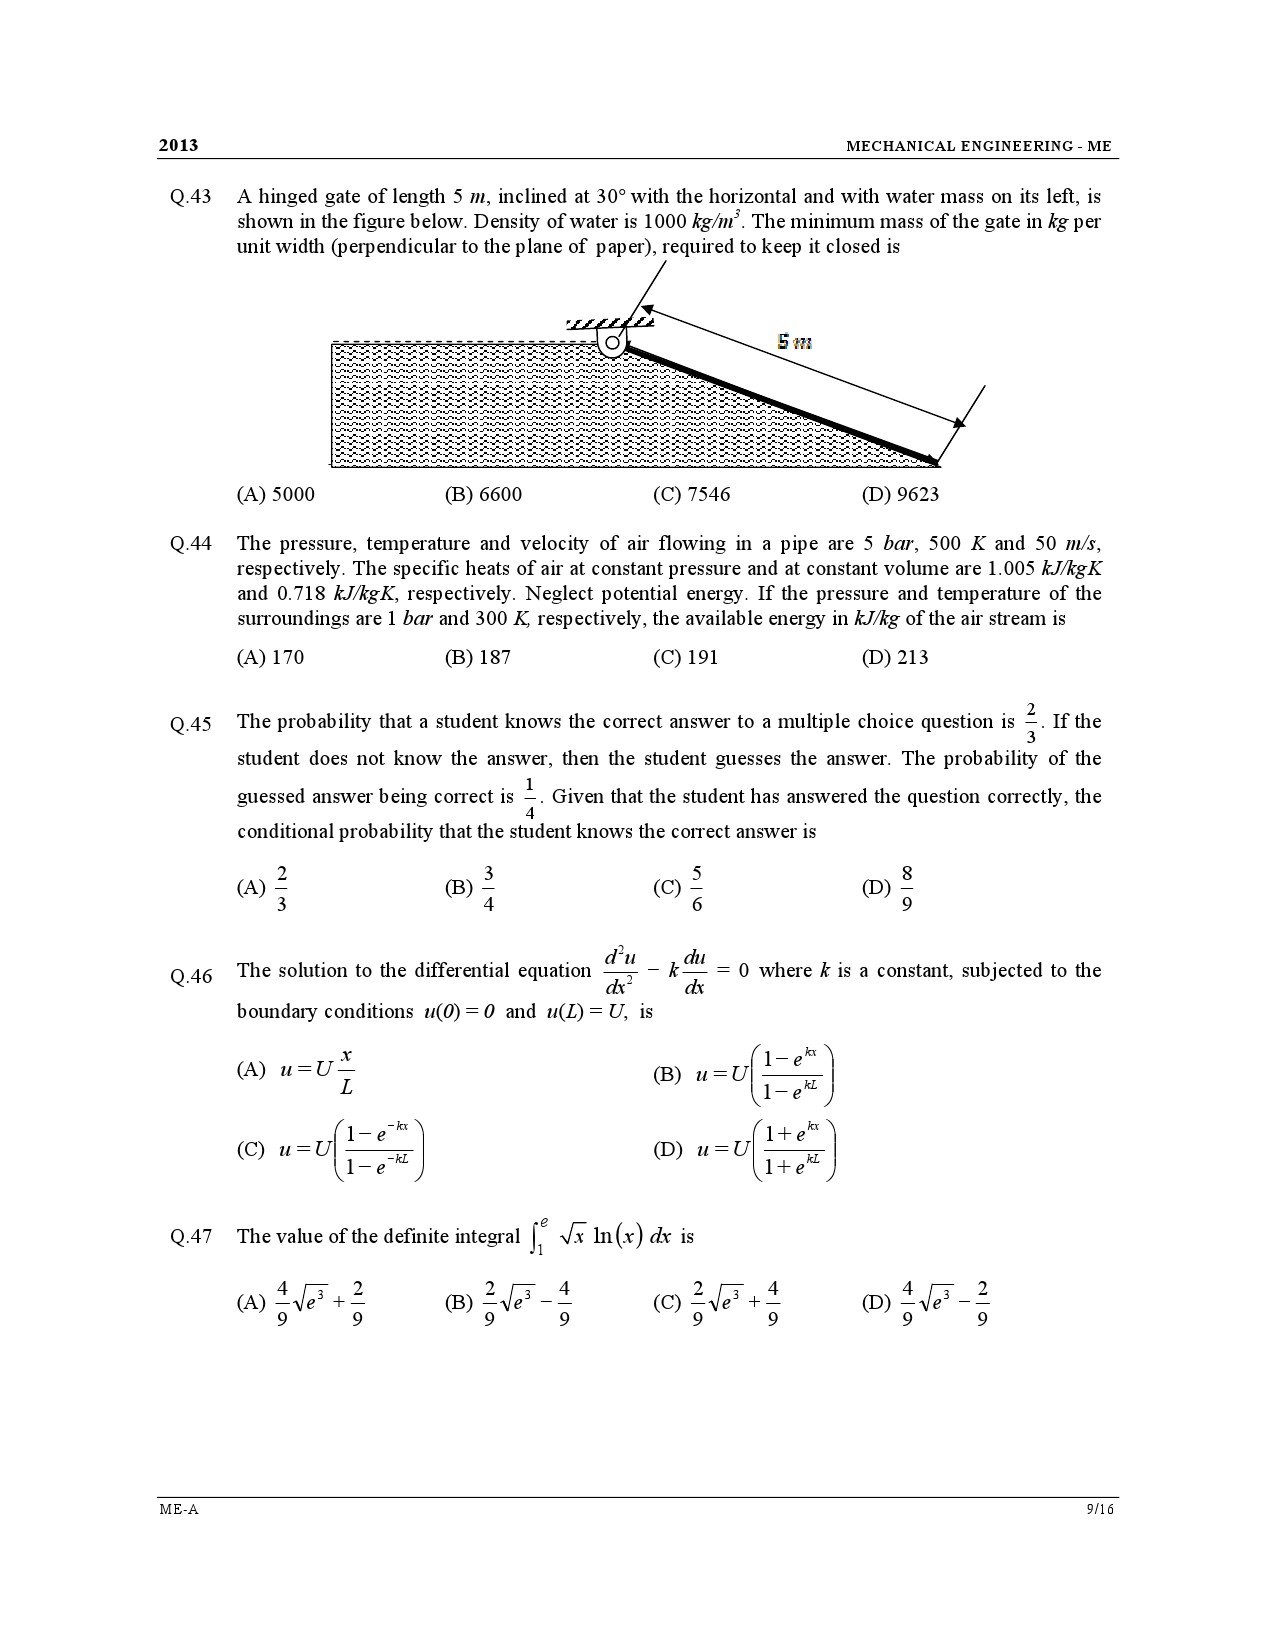 GATE Exam Question Paper 2013 Mechanical Engineering 9